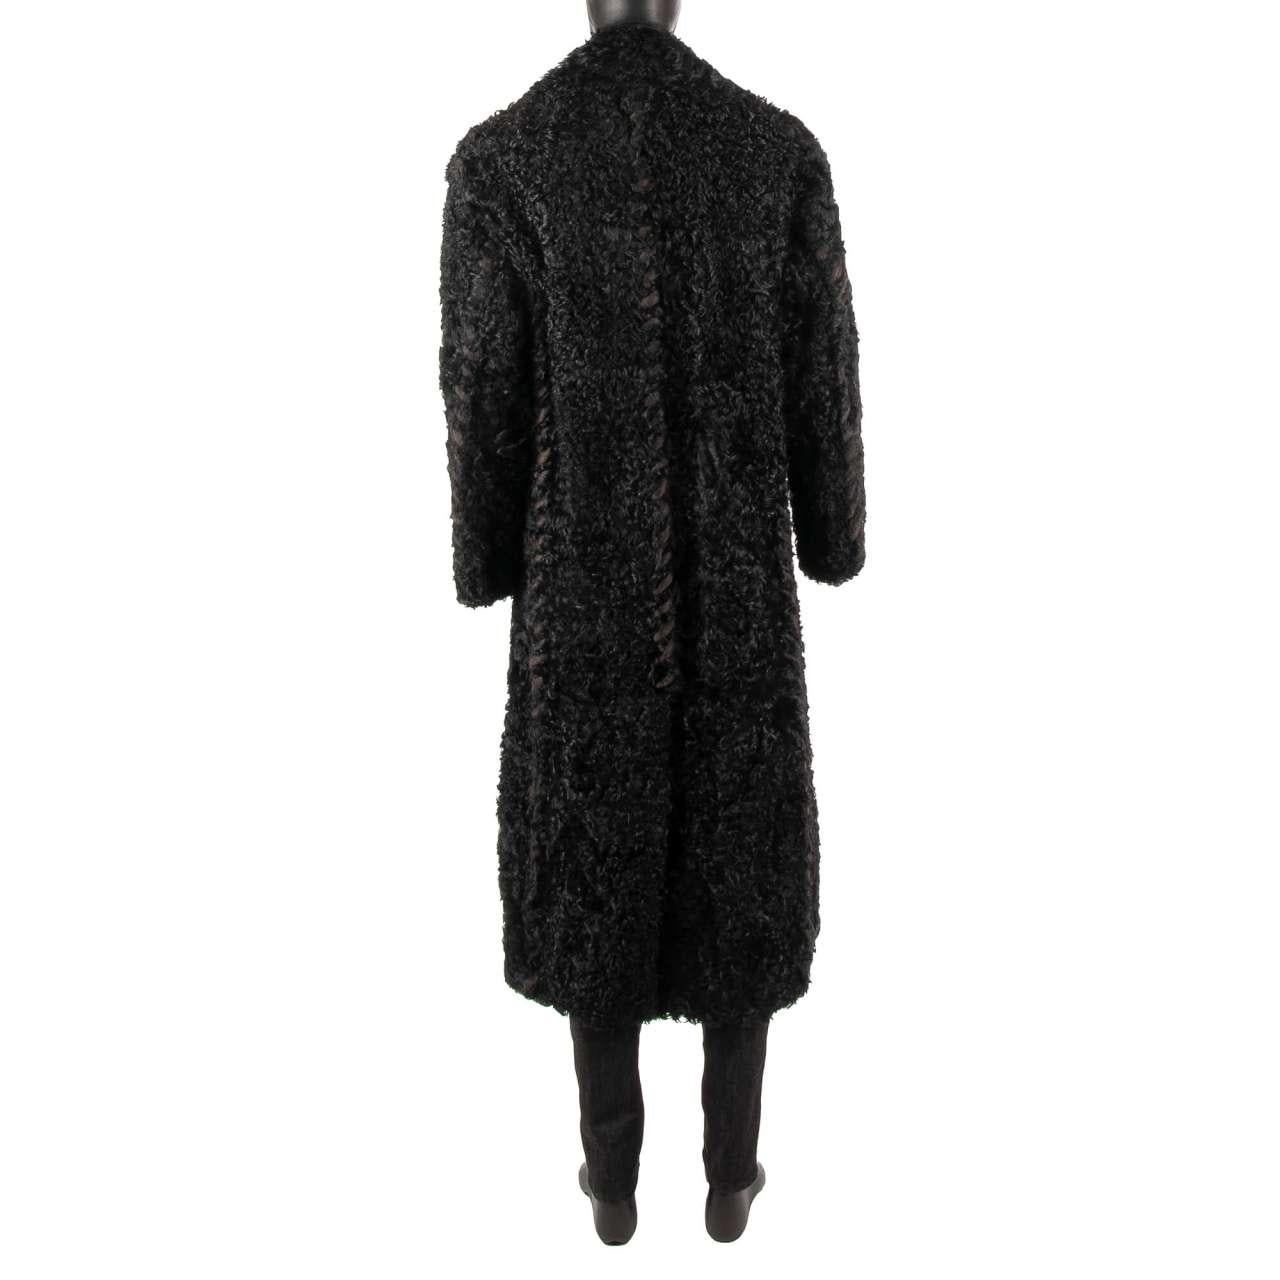 - Unique long and oversized double-breasted Lamb Fur and Leather Coat with pockets by DOLCE & GABBANA - Could be worn on both sides as fur coat or leather coat - RUNWAY - Dolce & Gabbana Fashion Show - New with tag - Former RRP: EUR 9.500 - MADE IN